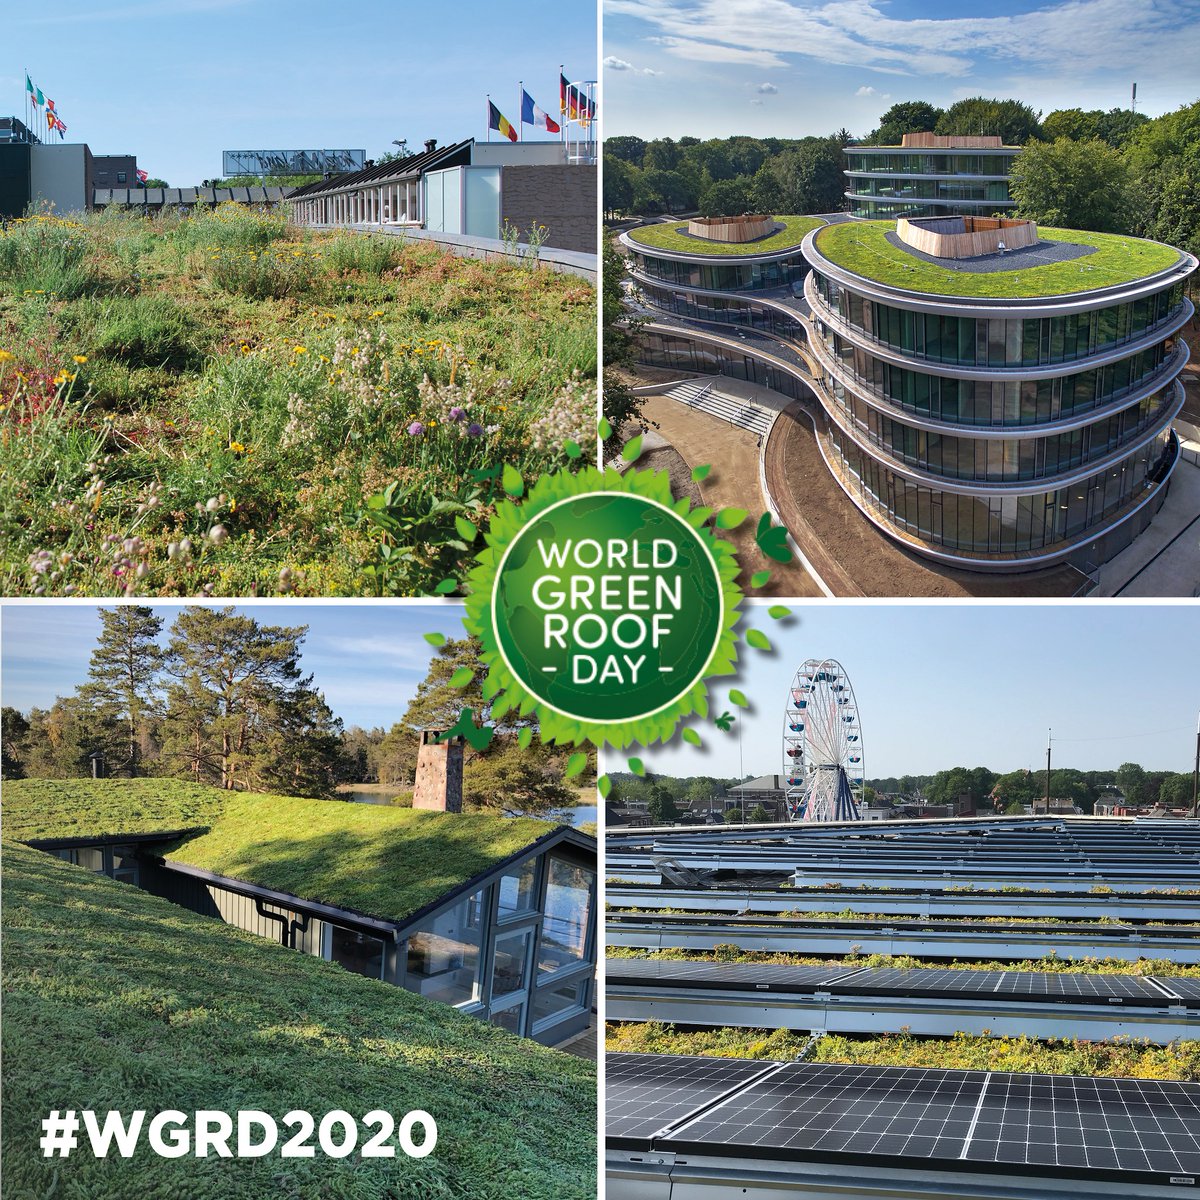 Today is World Green Roof Day! Green roofs are an important climate adaptive building shell. Join Sempergreen in greening cities globally to adapt to climate change. Together we make the world a little greener every day!
#WGRD #WGRD2020 #greenroofs #buildinggreen #urbangreen